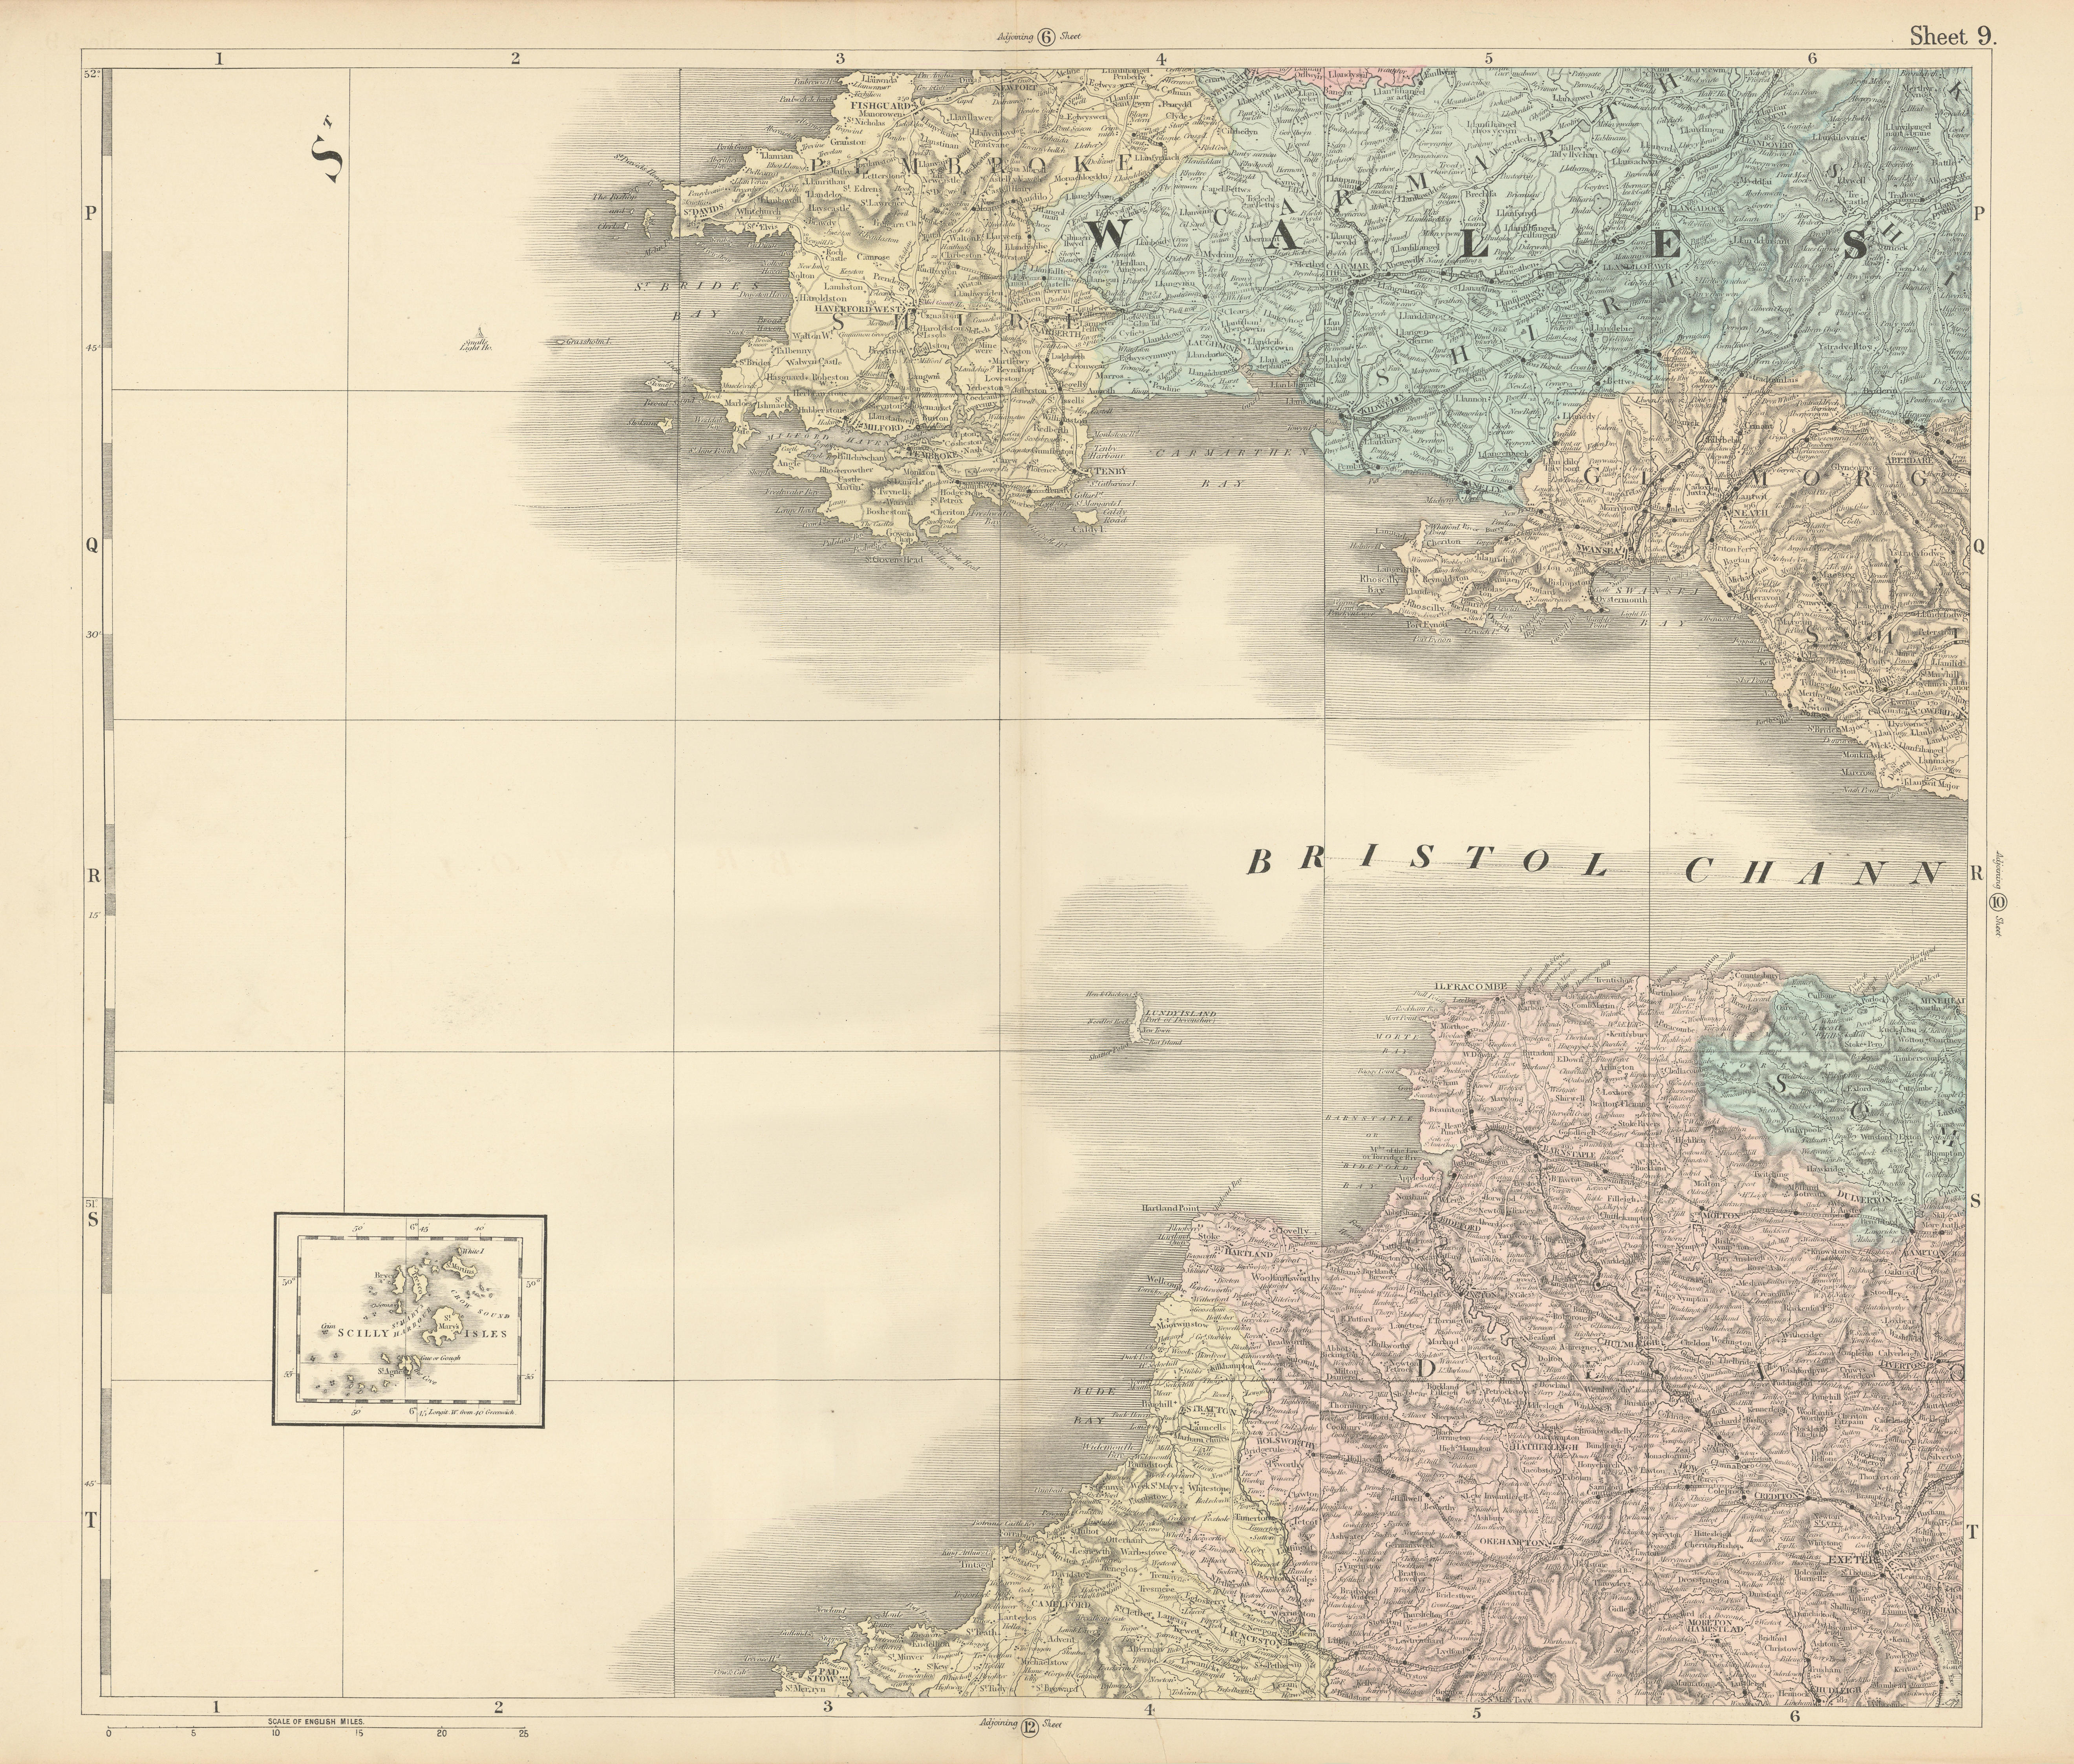 Associate Product Bristol Channel. South Wales & North Devon/Cornwall coasts. BACON 1883 old map